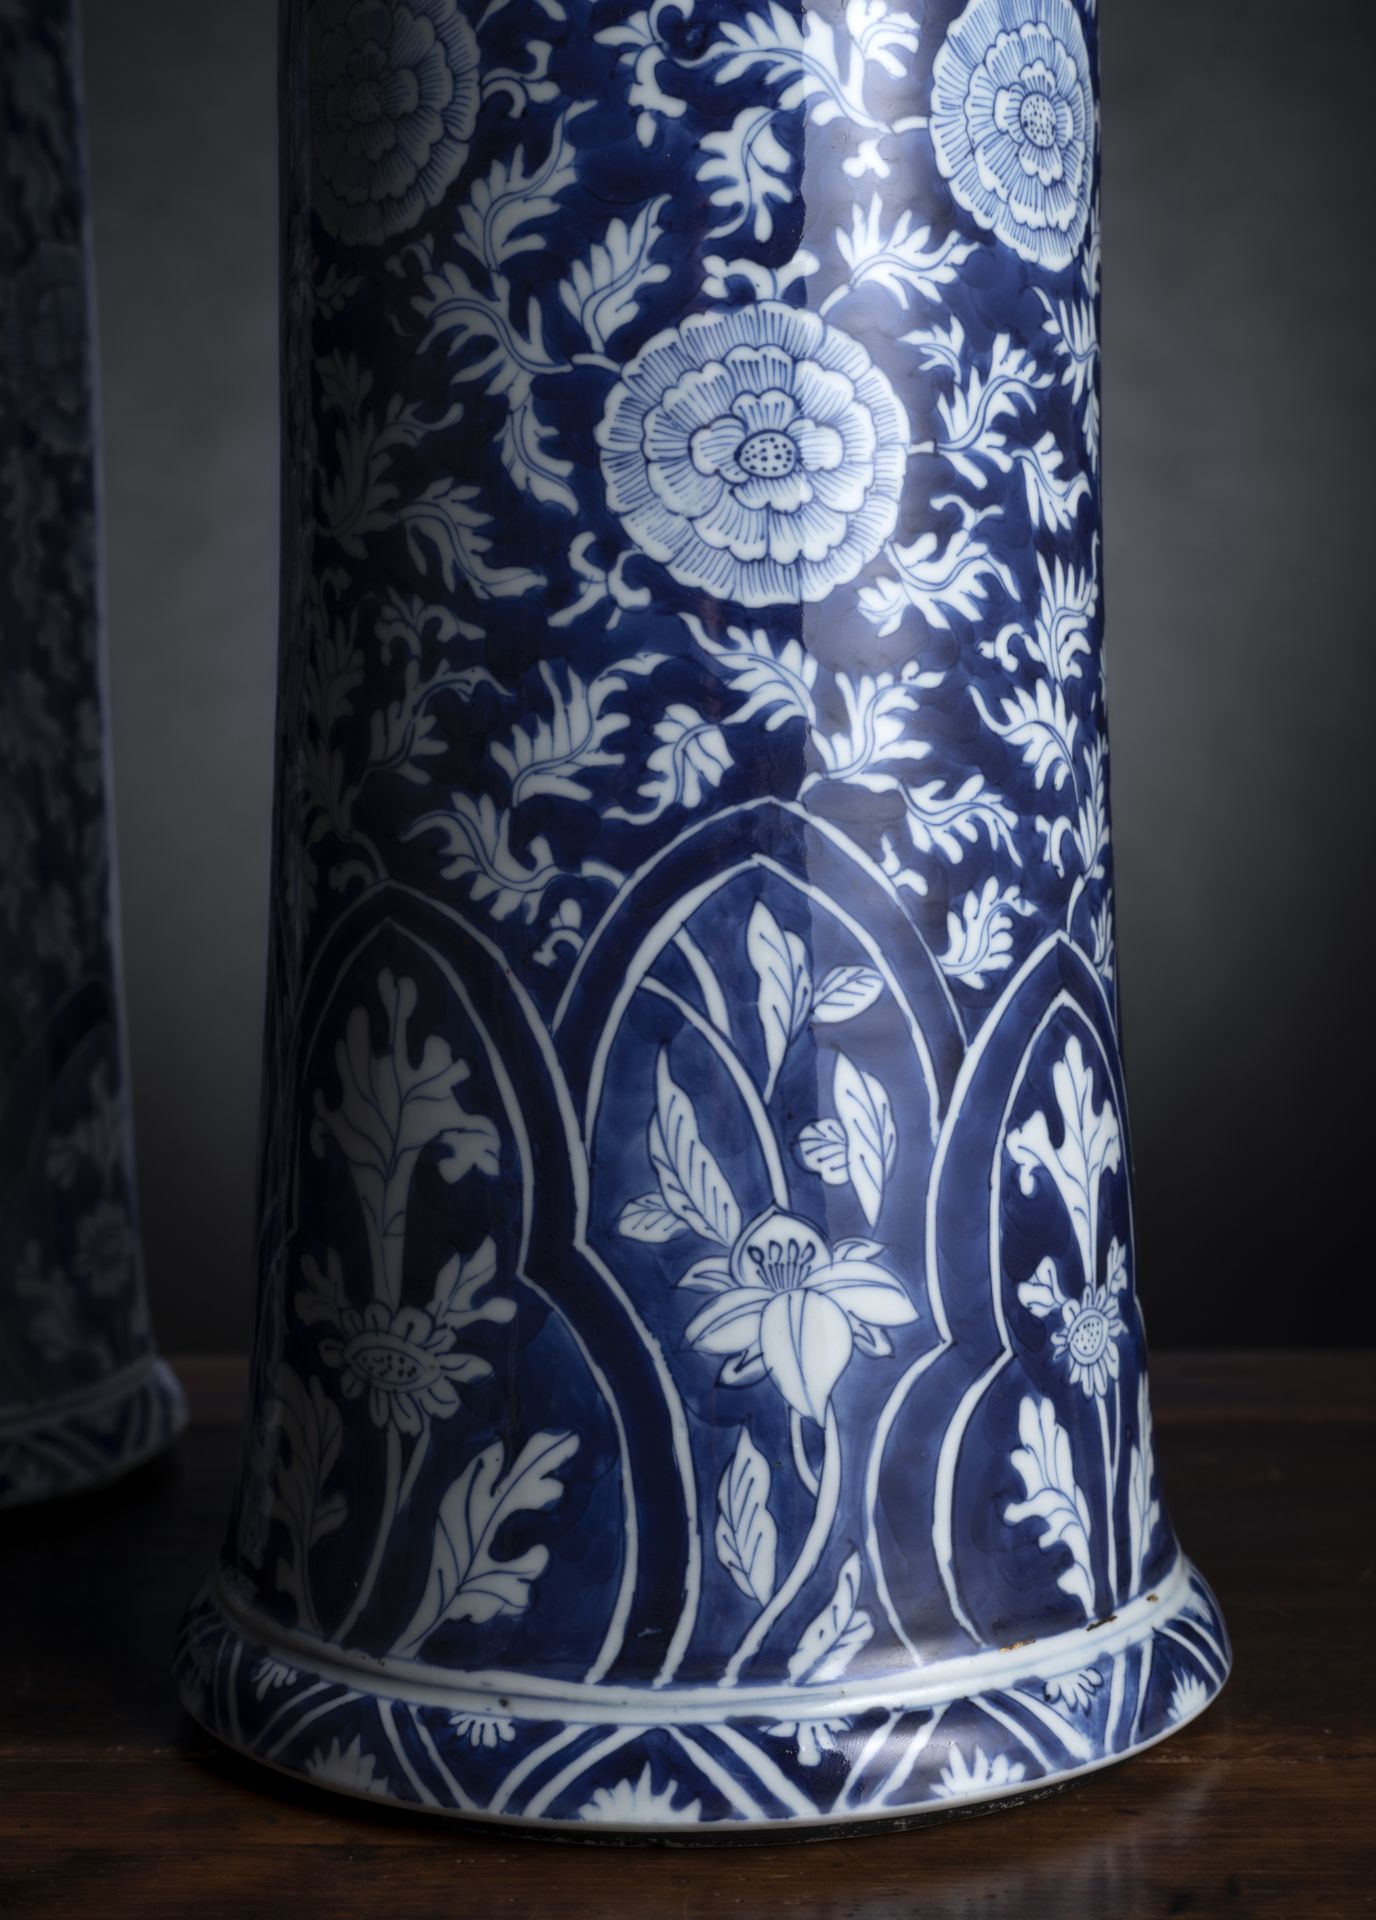 A FINE AND VERY RARE PAIR OF BLUE AND WHITE VASES WITH DIFFERENT FLOWERS SCROLLWORK FROM THE COLLEC - Image 5 of 7